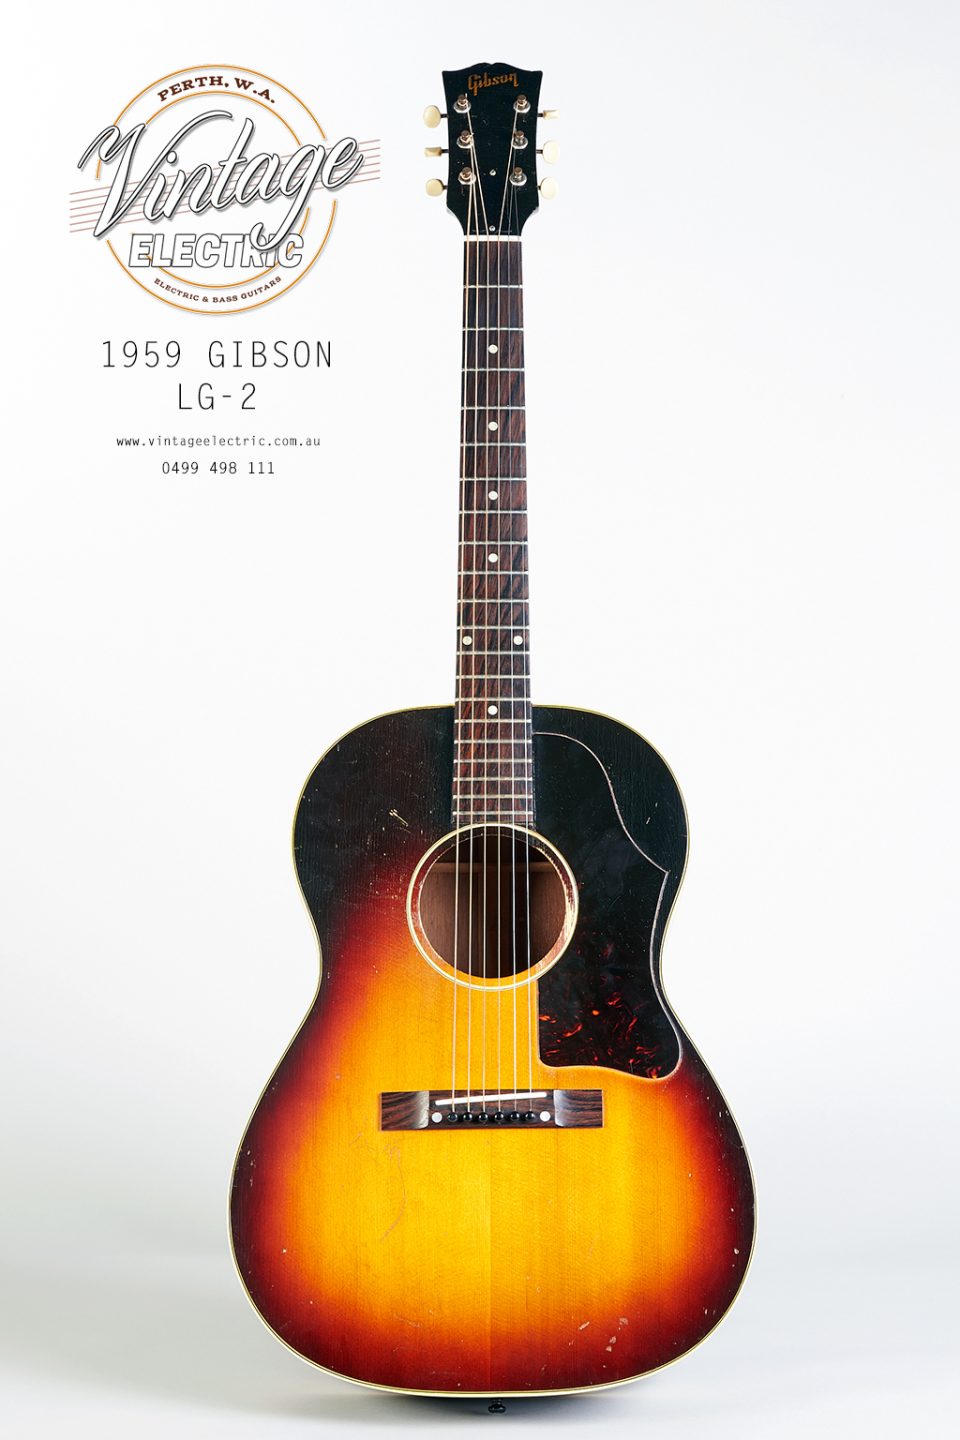 1959 Gibson LG-2 Acoustic Guitar